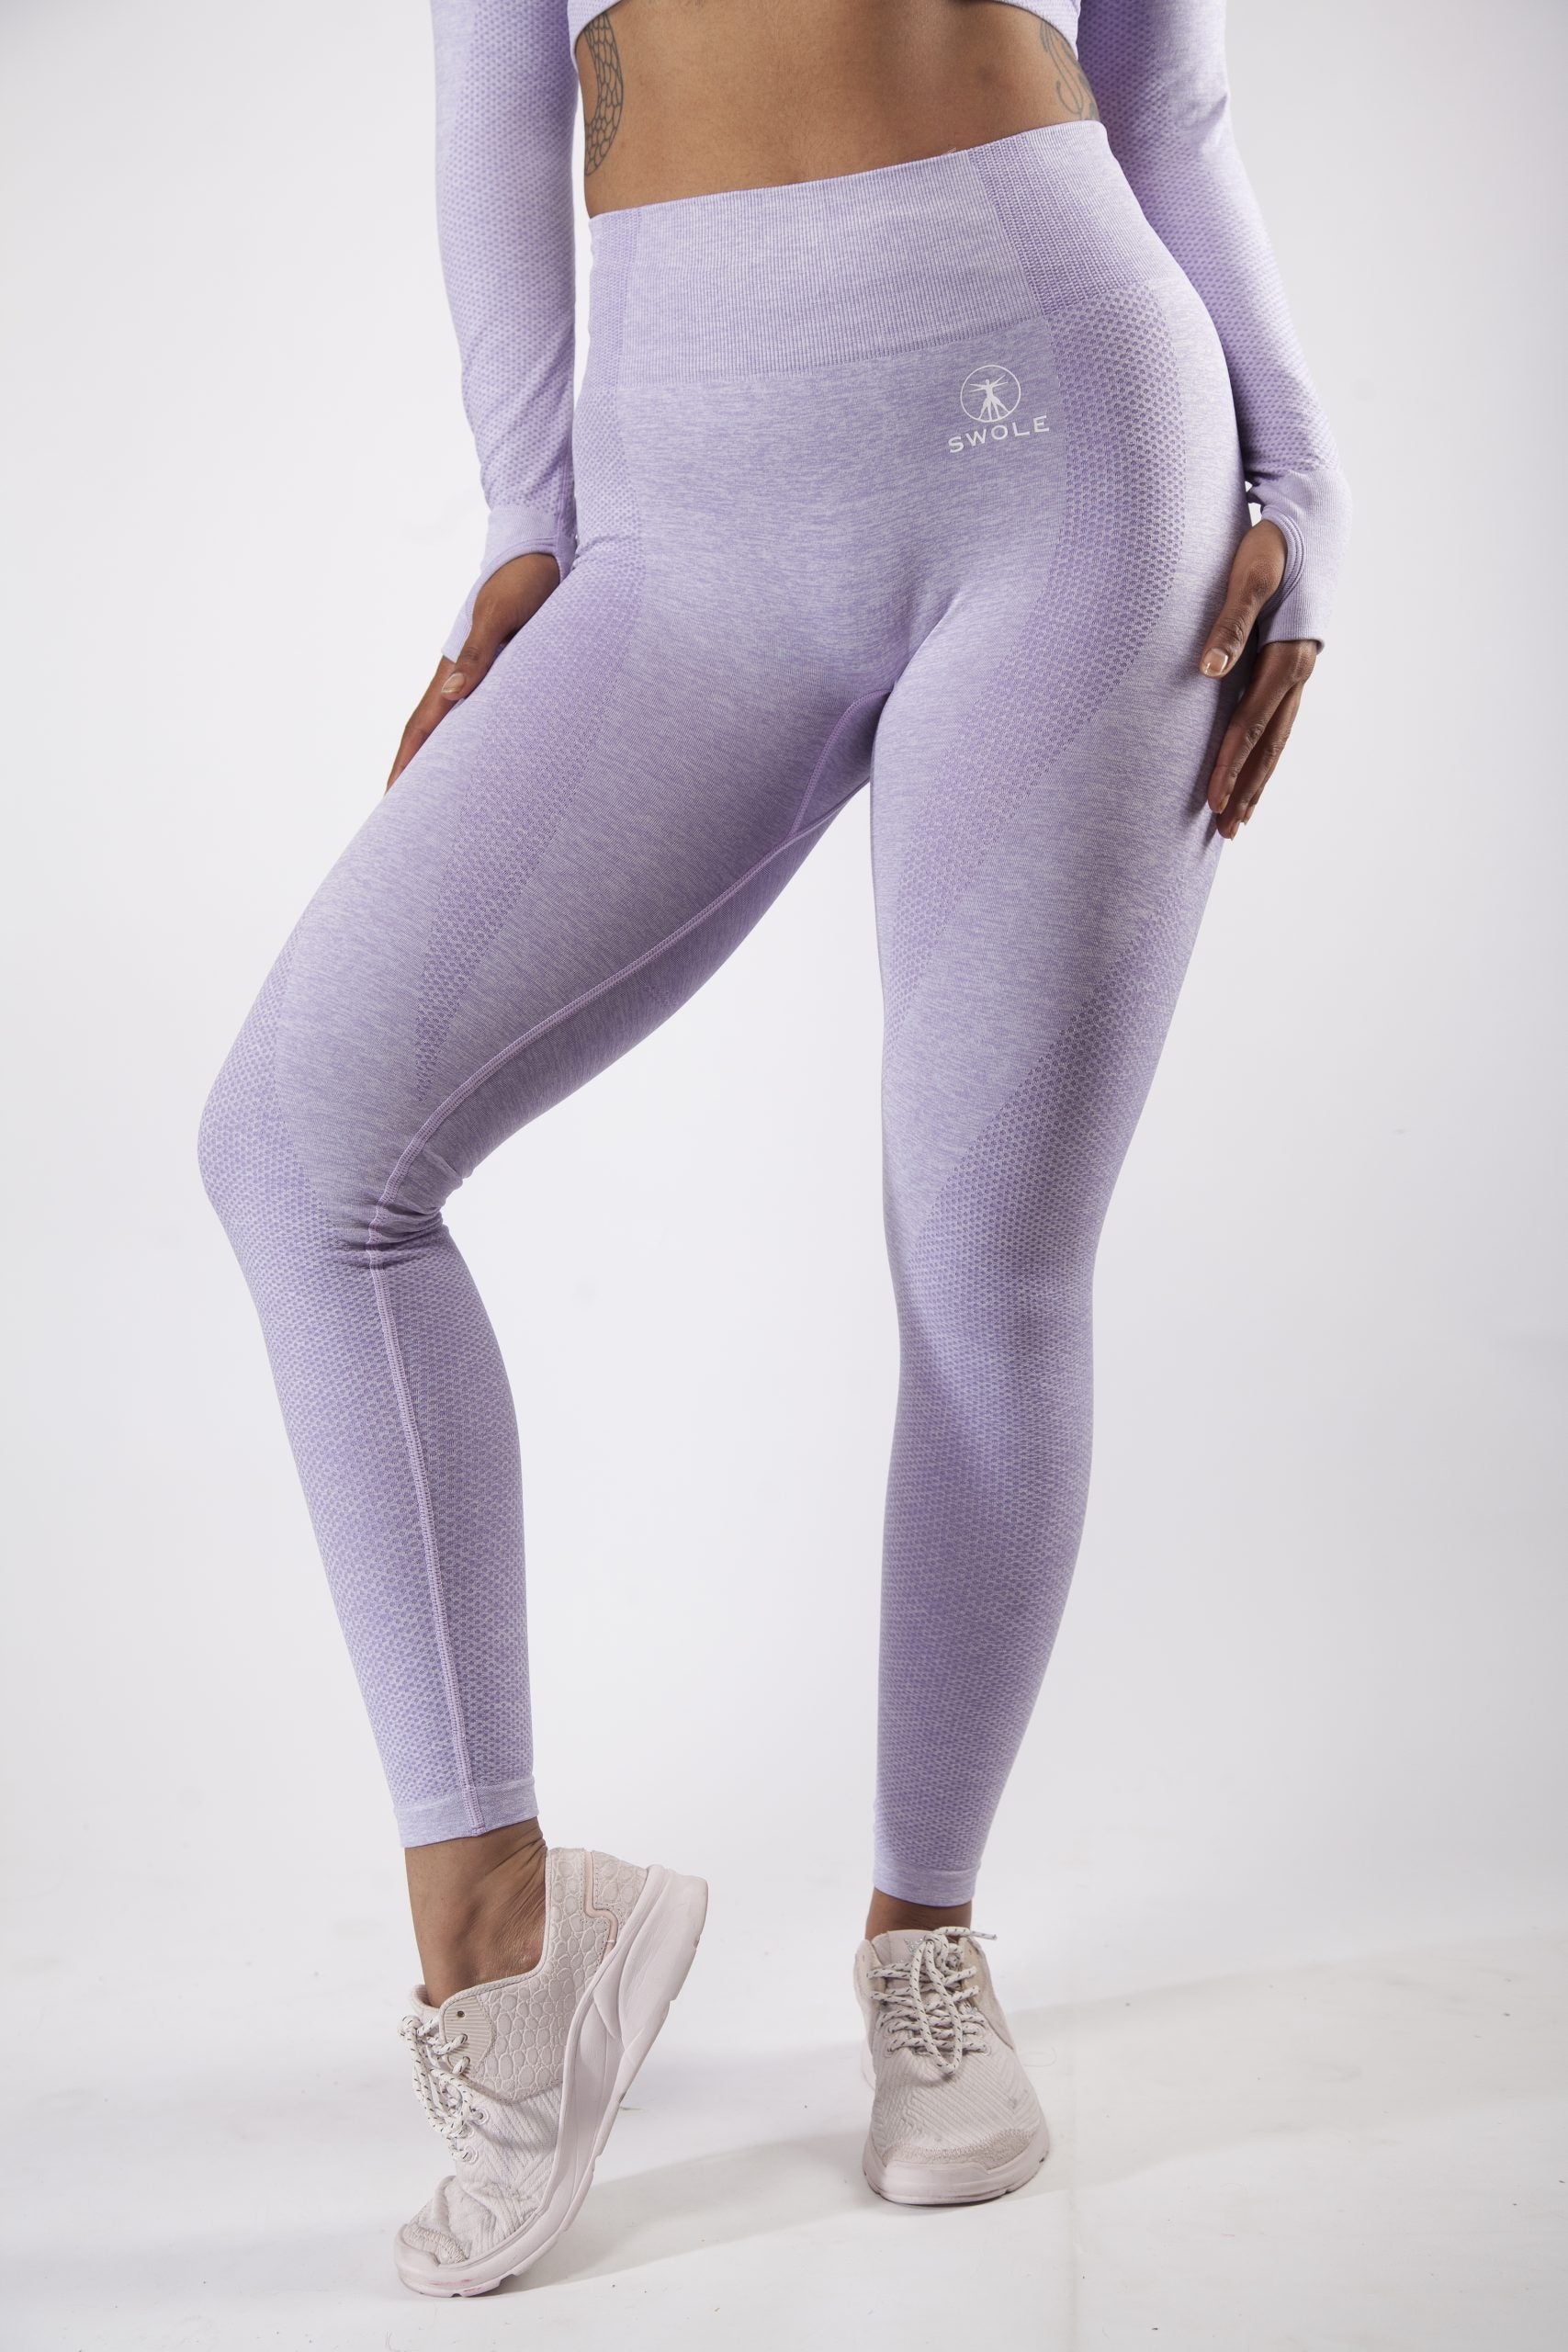 Limitless Leggings in Lilac